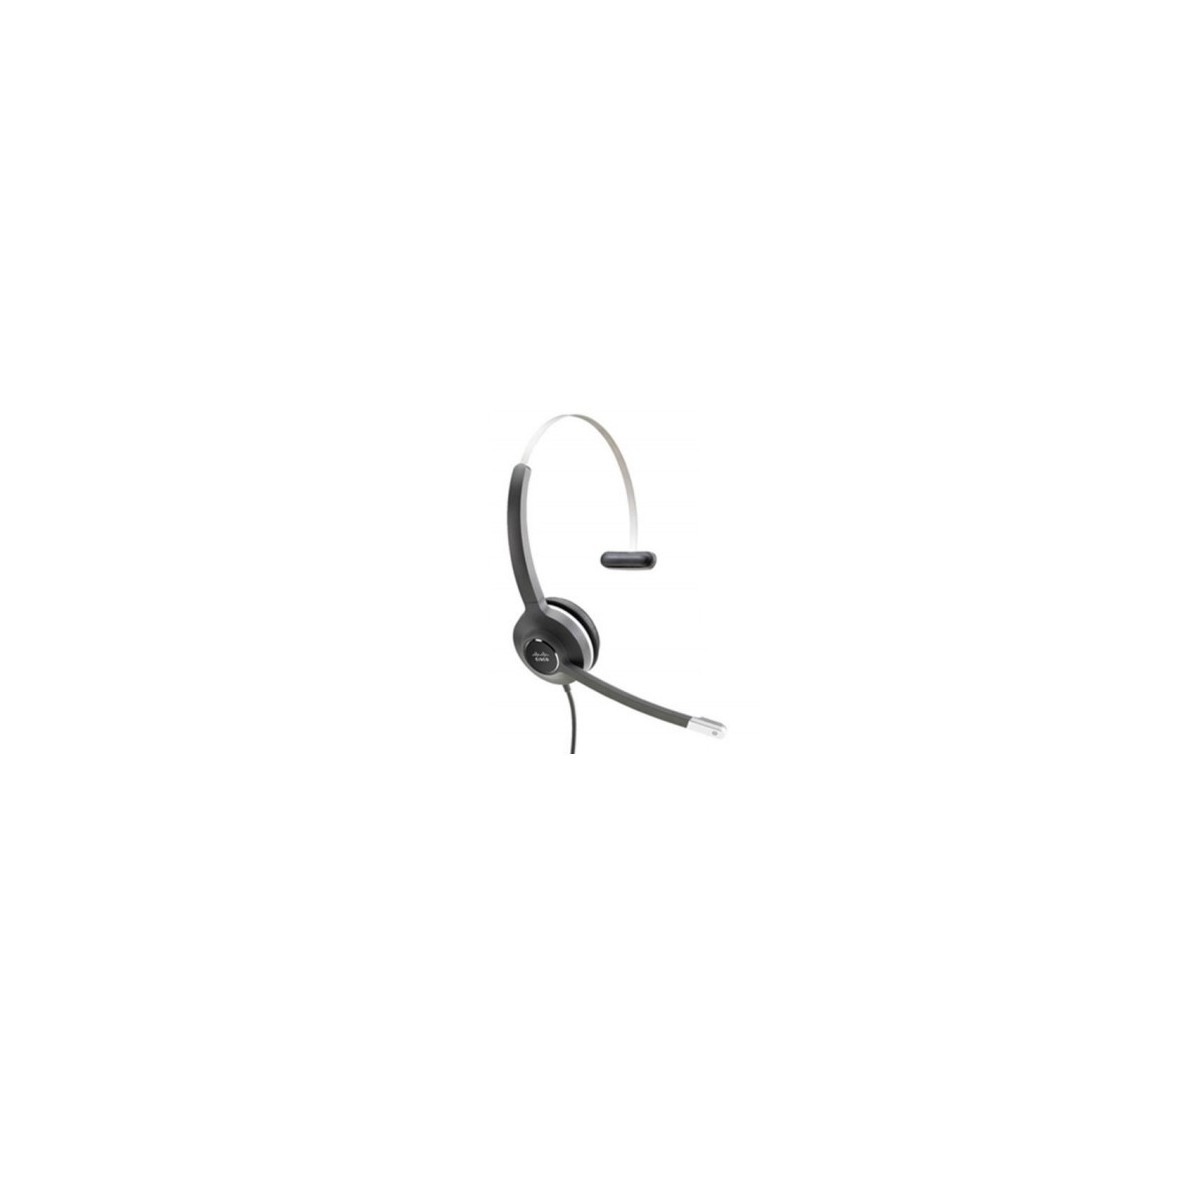 Cisco Headset 531 - Headset - Head-band - Office/Call center - Black - Gray - Monaural - In-line control unit